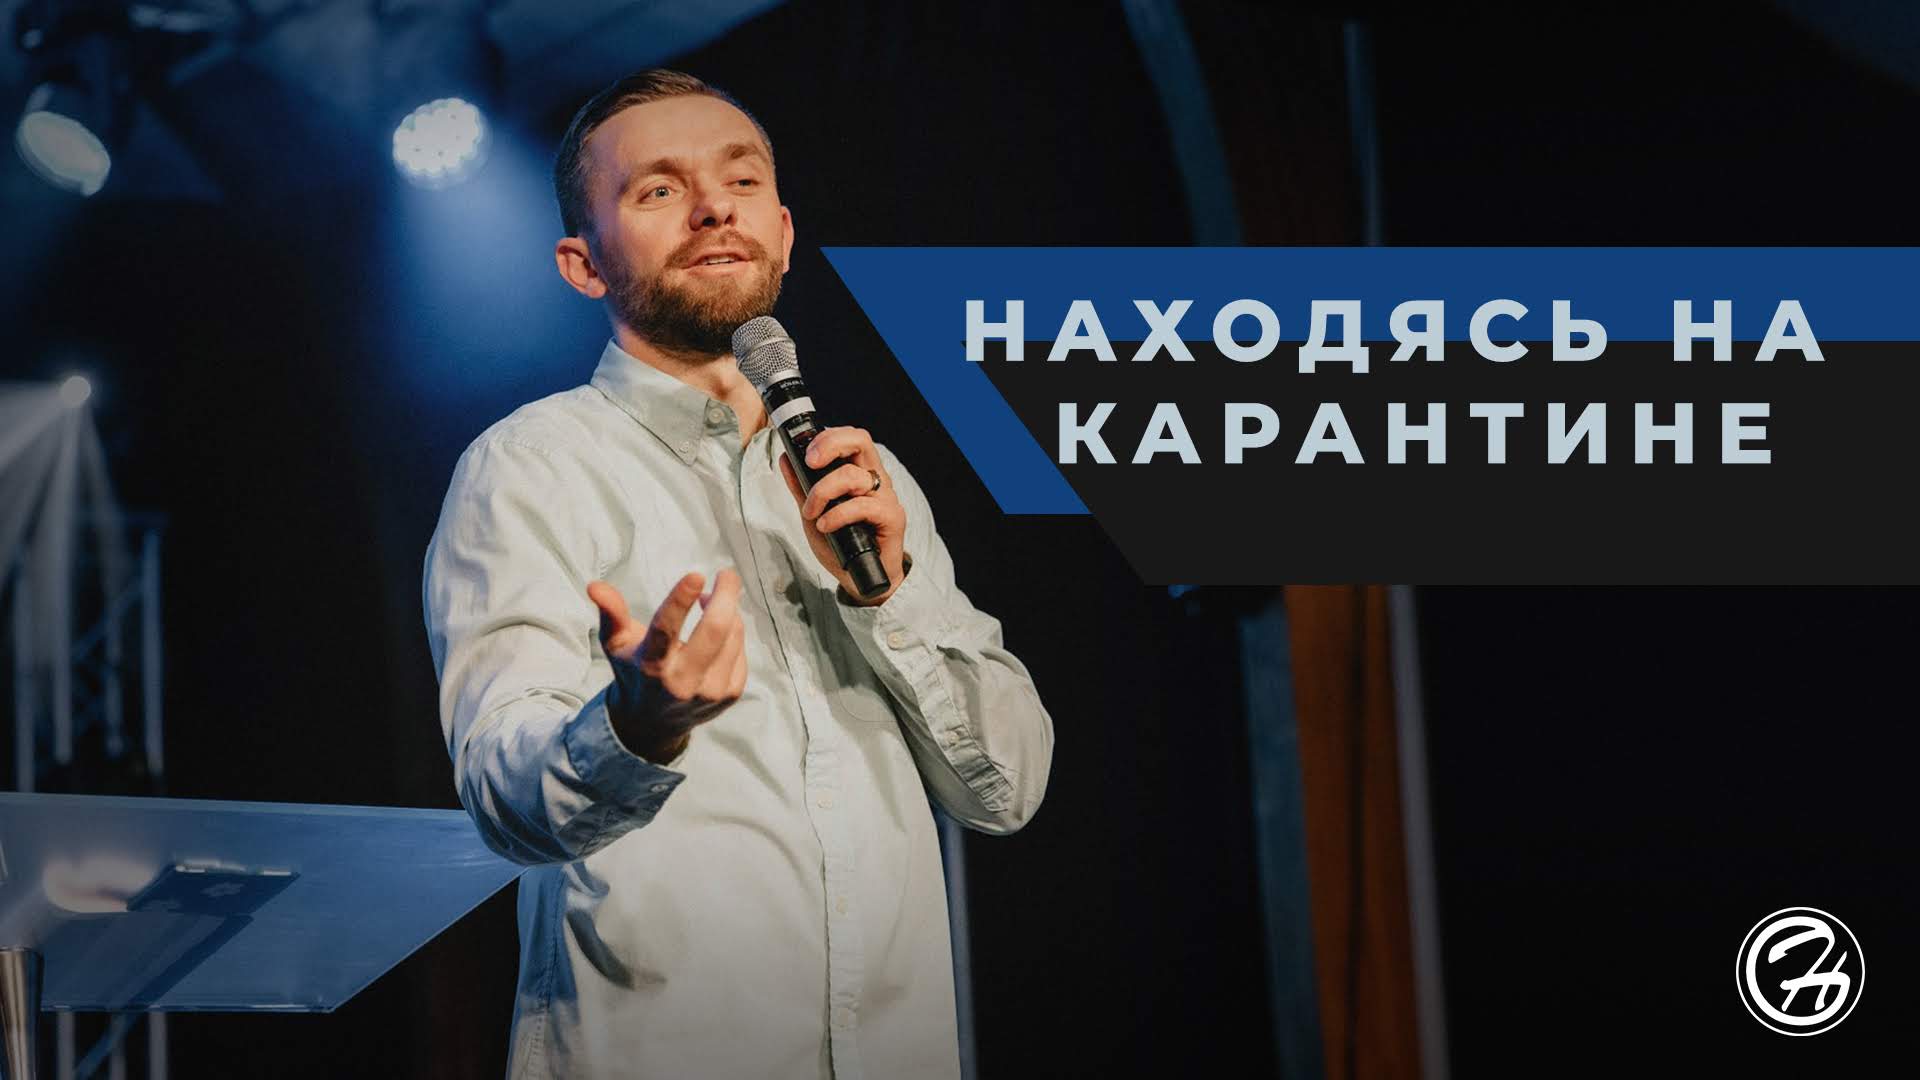 Featured image for 'Находясь на карантине'